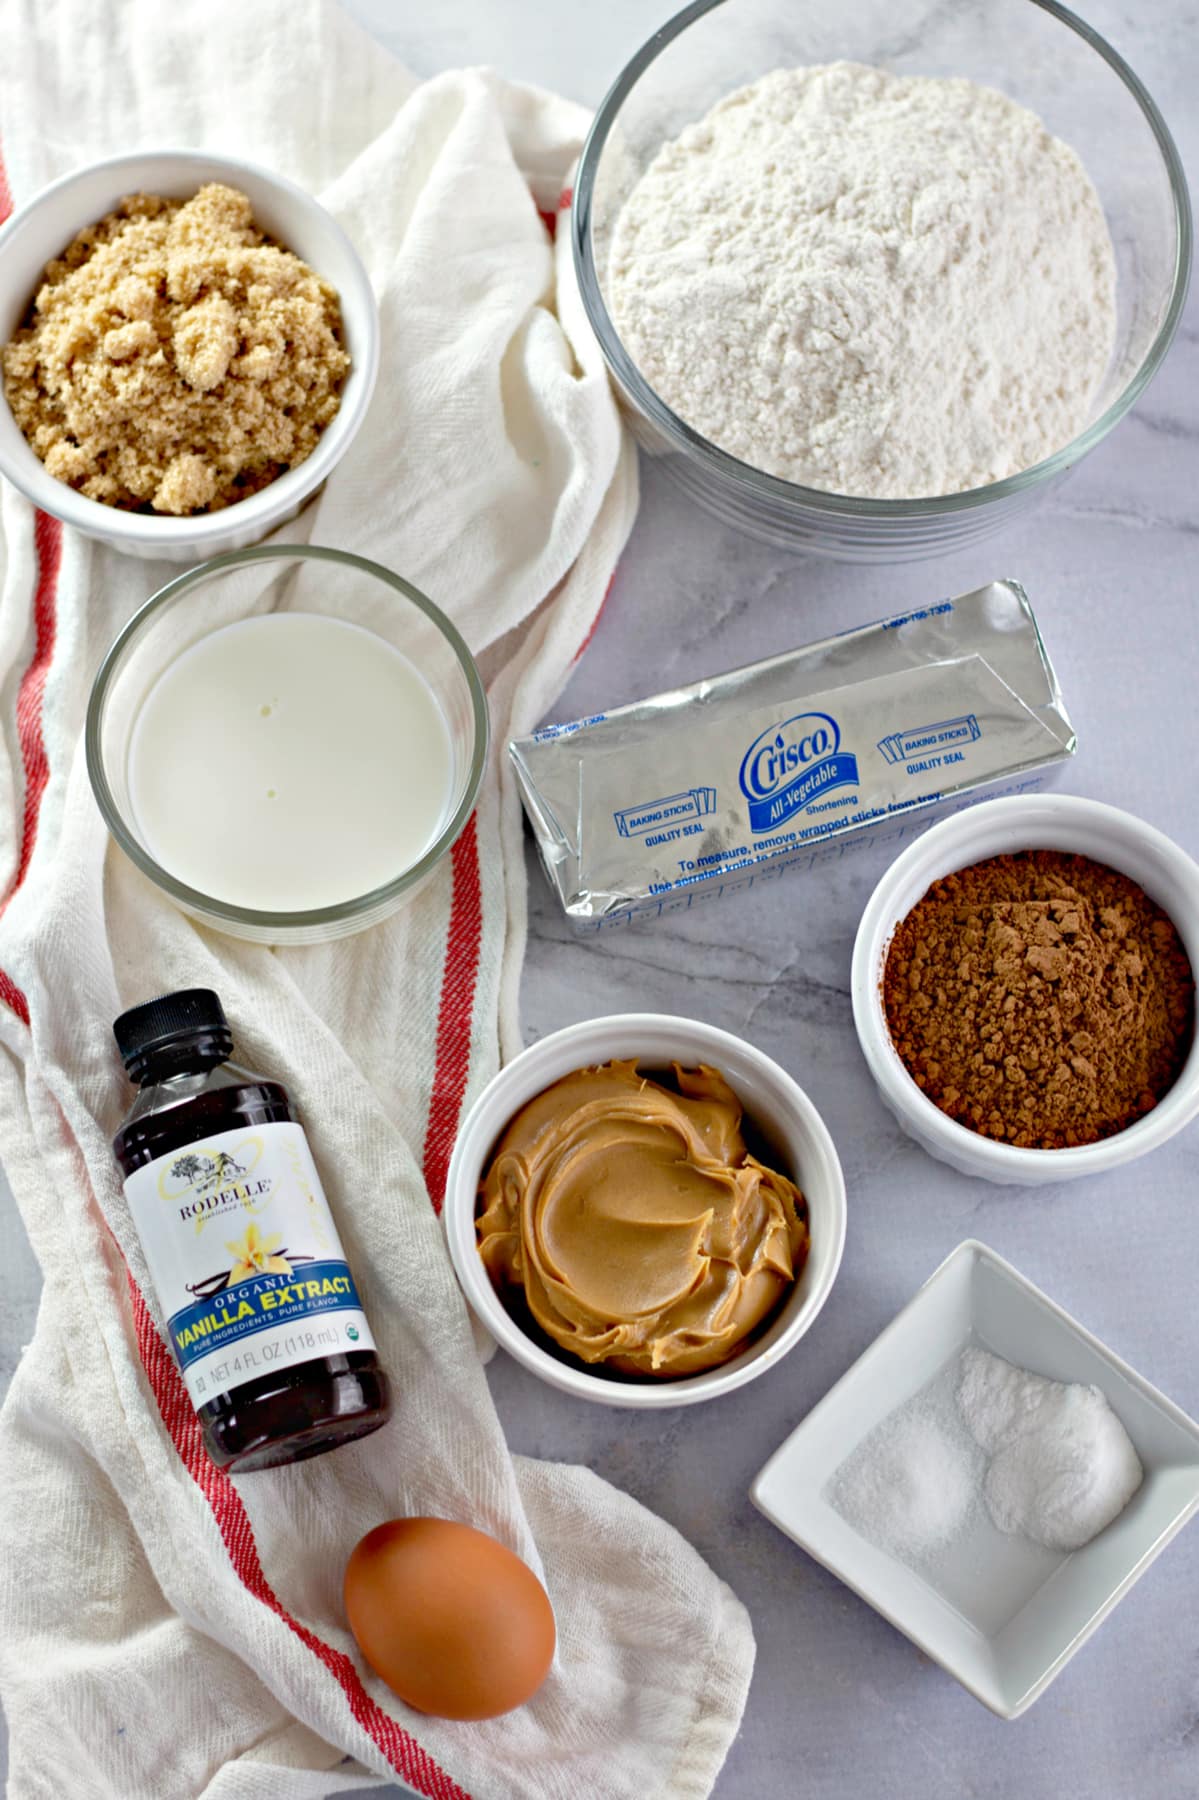 ingredients needed to make chocolate peanut butter cookies